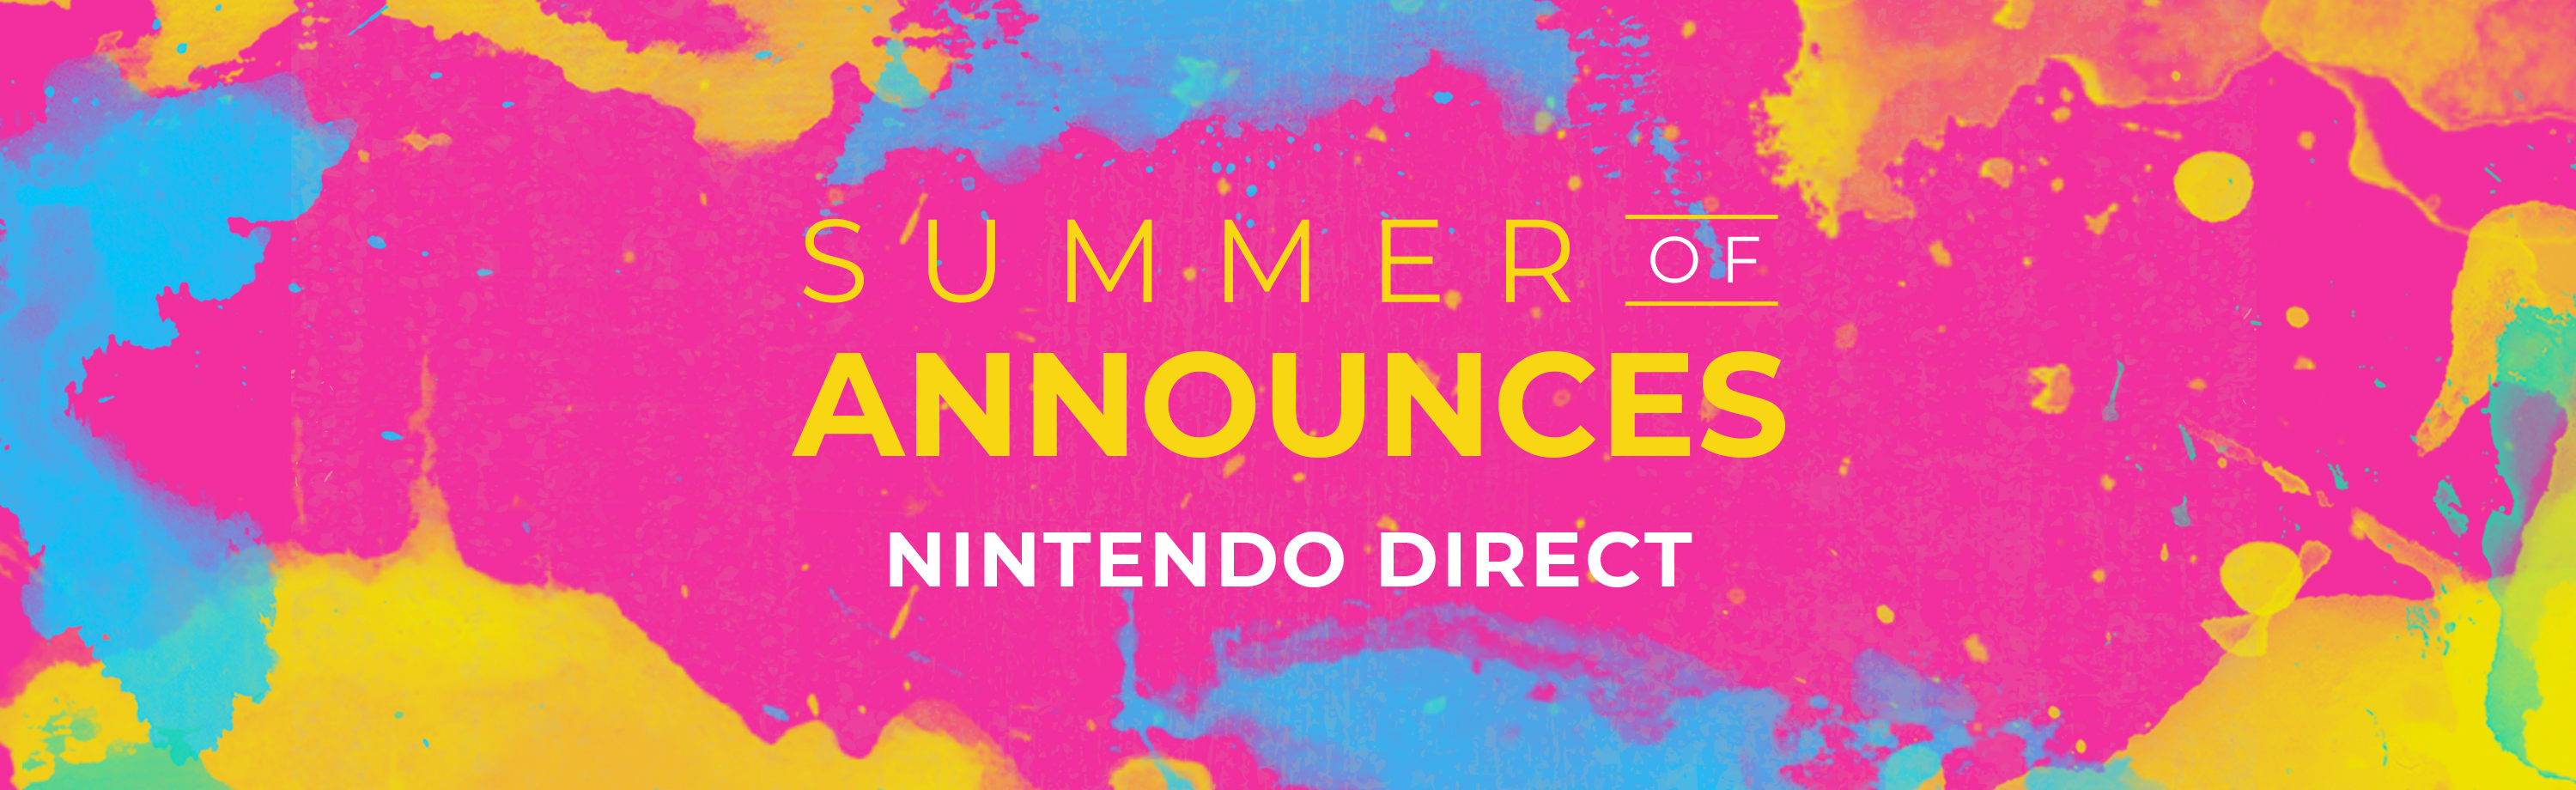 Nintendo Direct at Summer of Announces